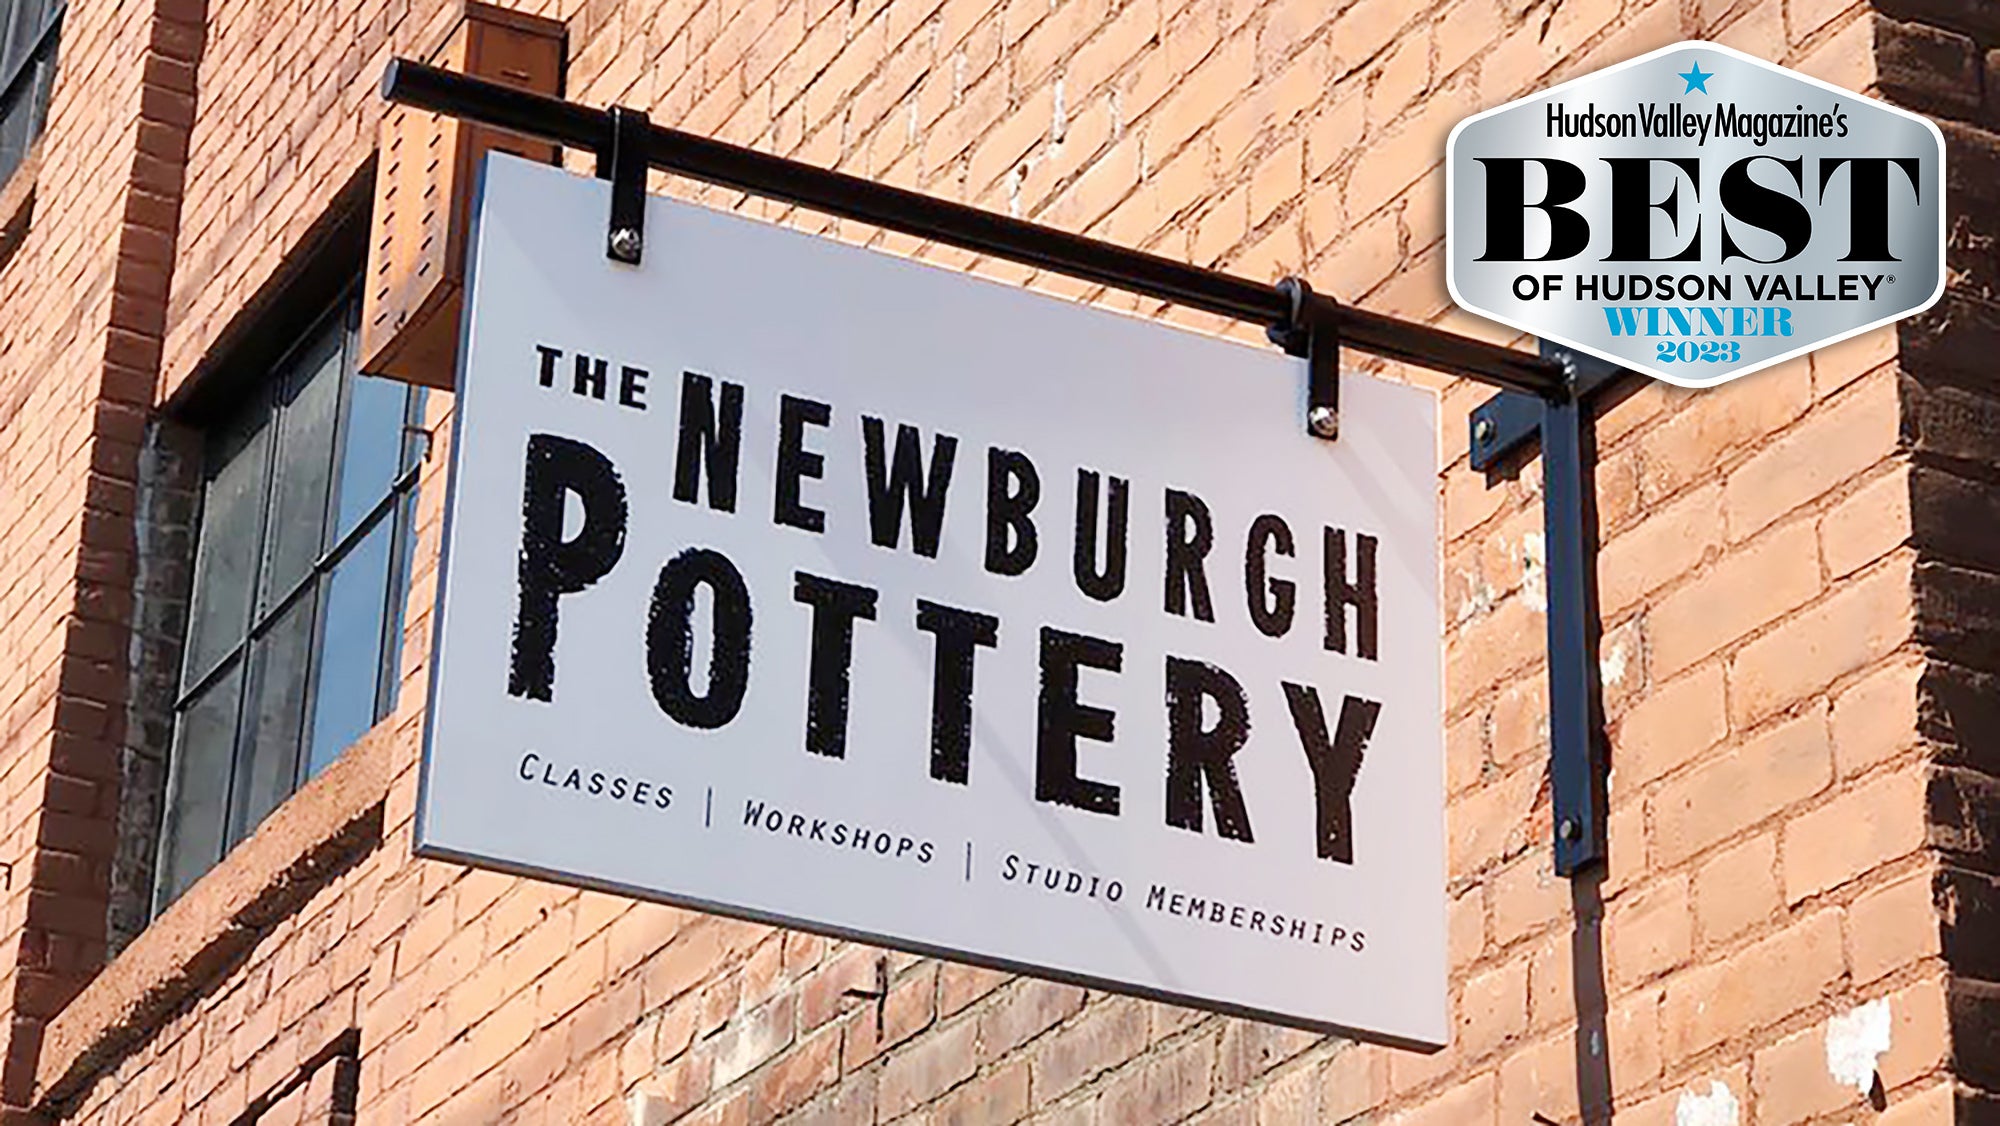 Home  The Newburgh Pottery